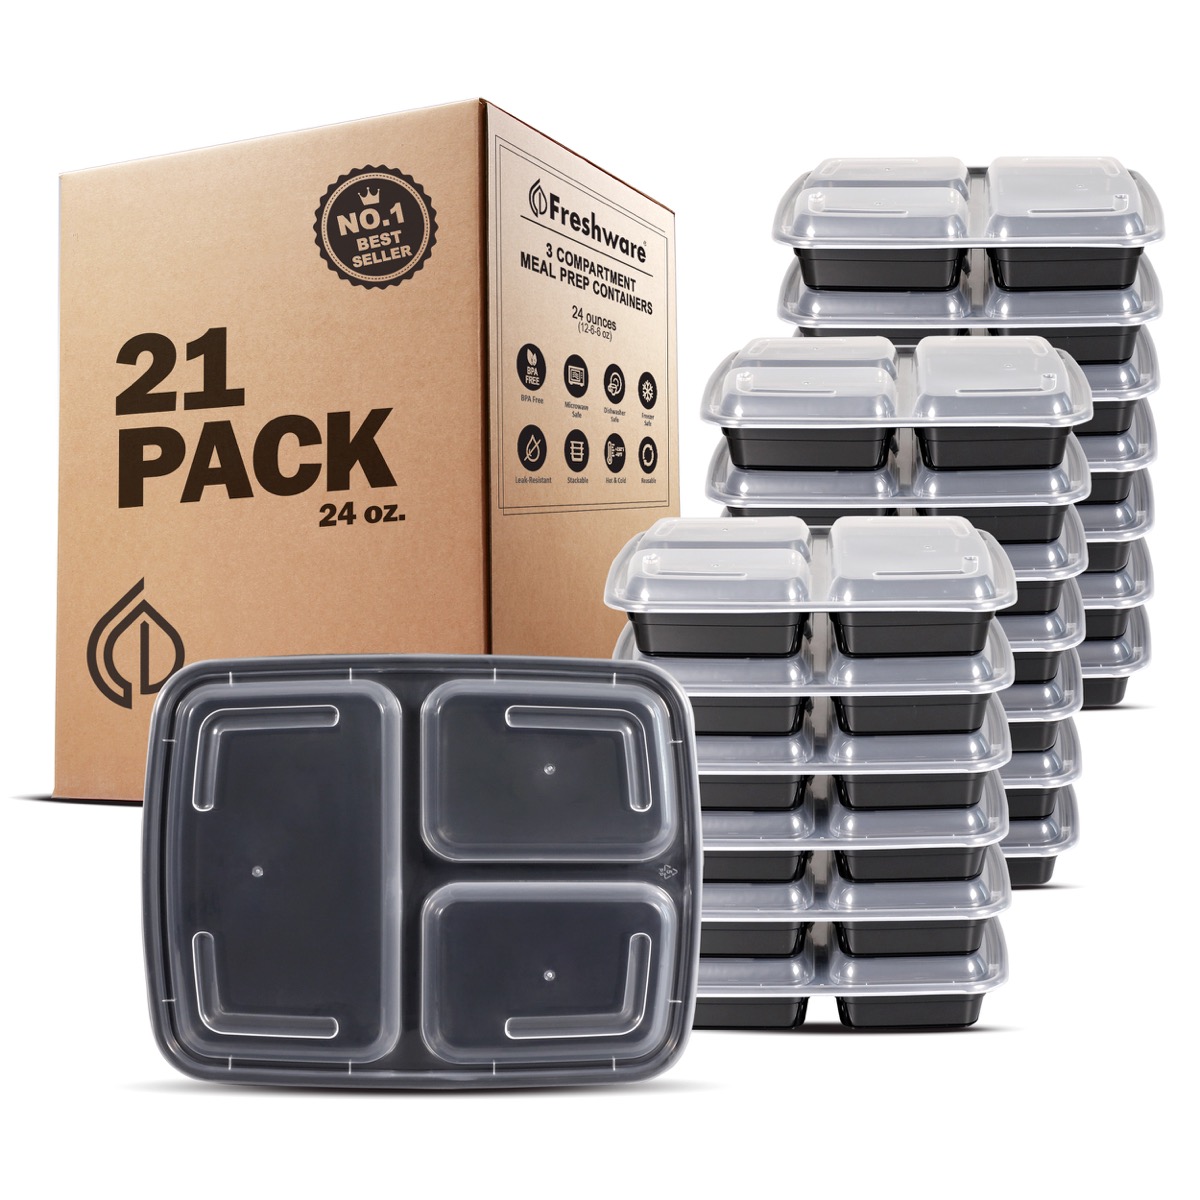 black meal prep containers with clear tops and brown cardboard box, cheap meal prep containers